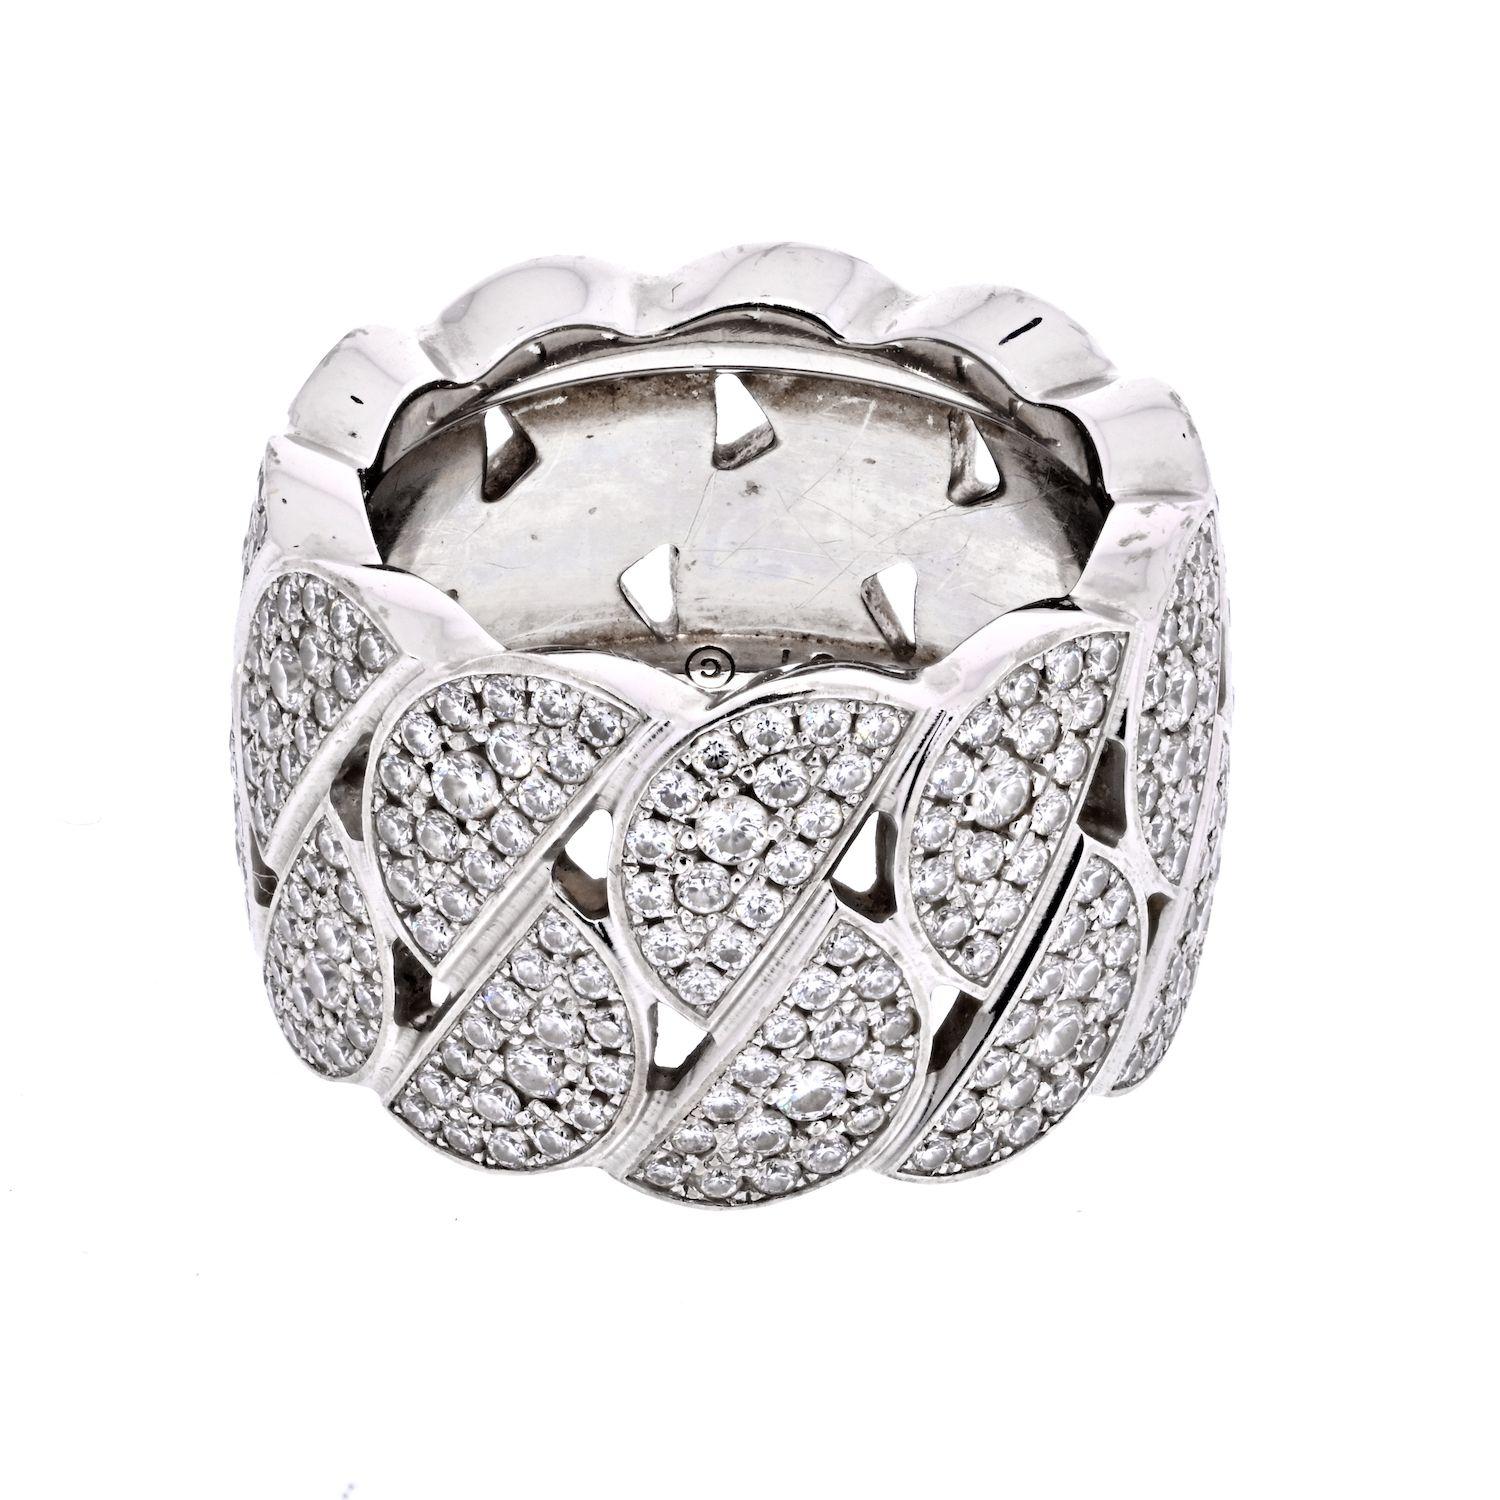 Ladies Cartier 18kt white gold and diamond 'La Dona' wide ring comprised of a double row of half-moon shaped links that are all set with pave round brillant cut diamonds. Size EU 51. US 5.75
Ring Width: 13.5mm
Grams: 18gr